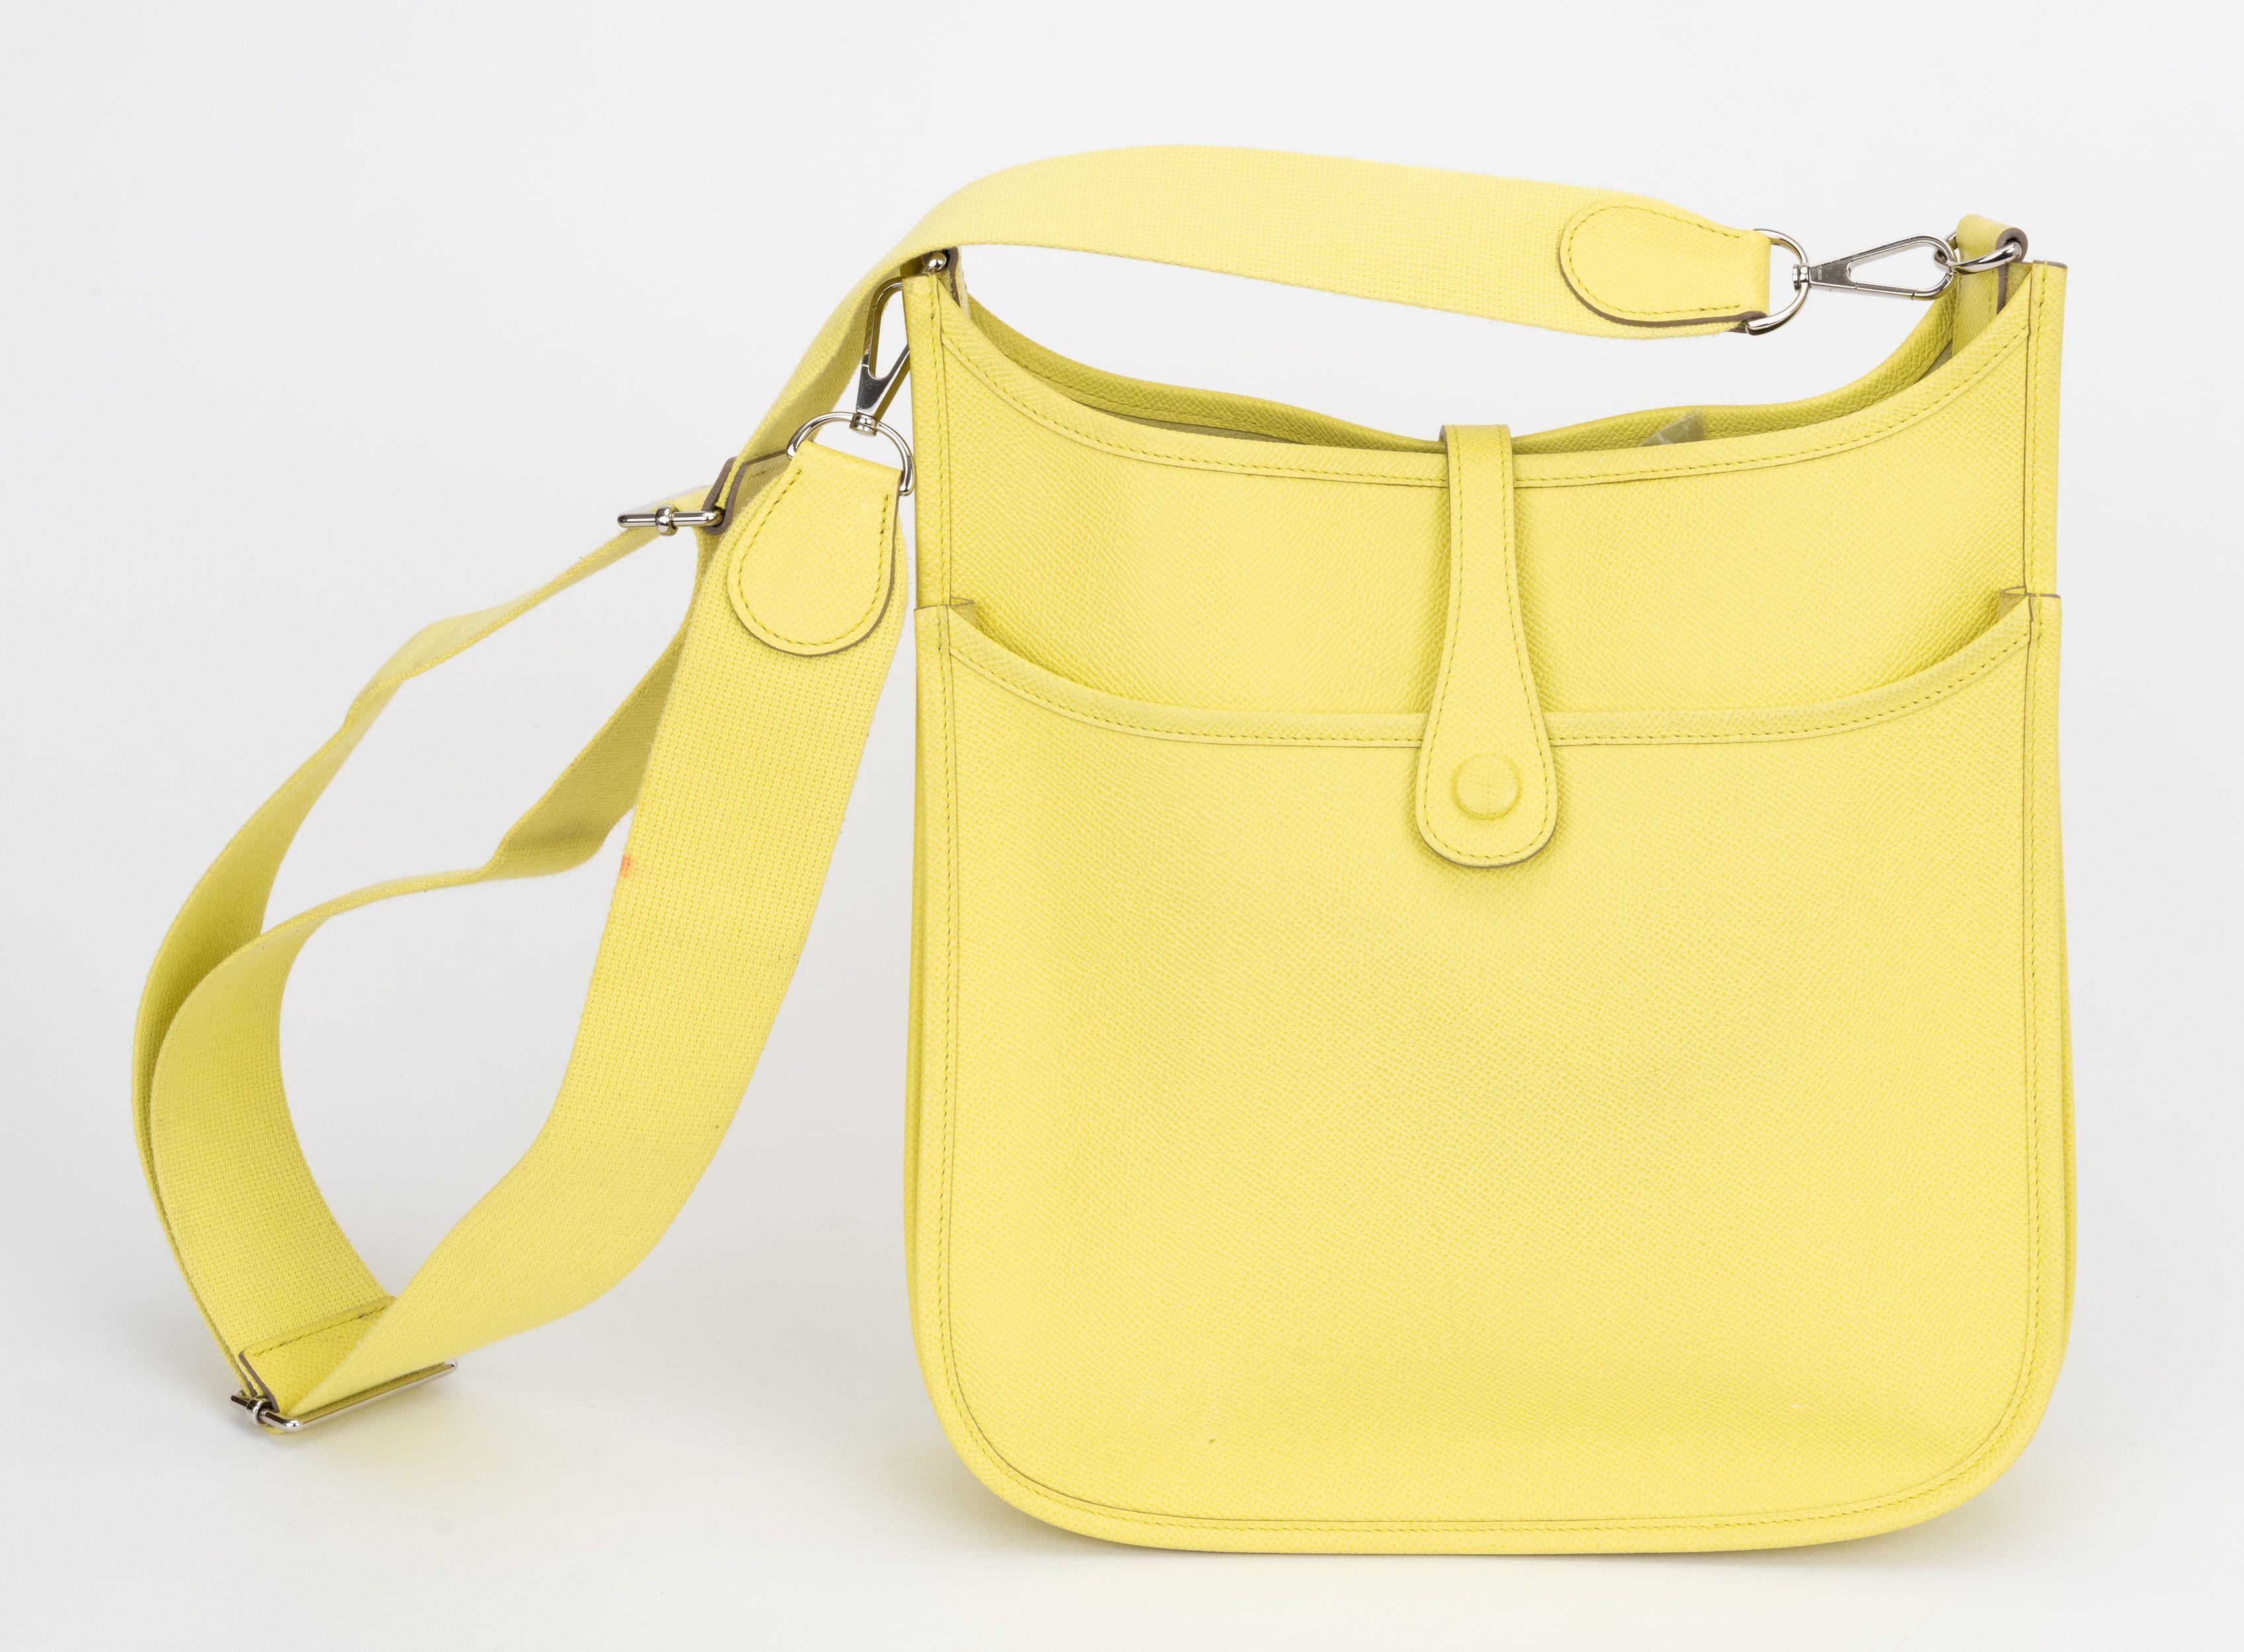 Hermès Jaune Poussin Epsom Evelyne PM In Excellent Condition For Sale In West Hollywood, CA